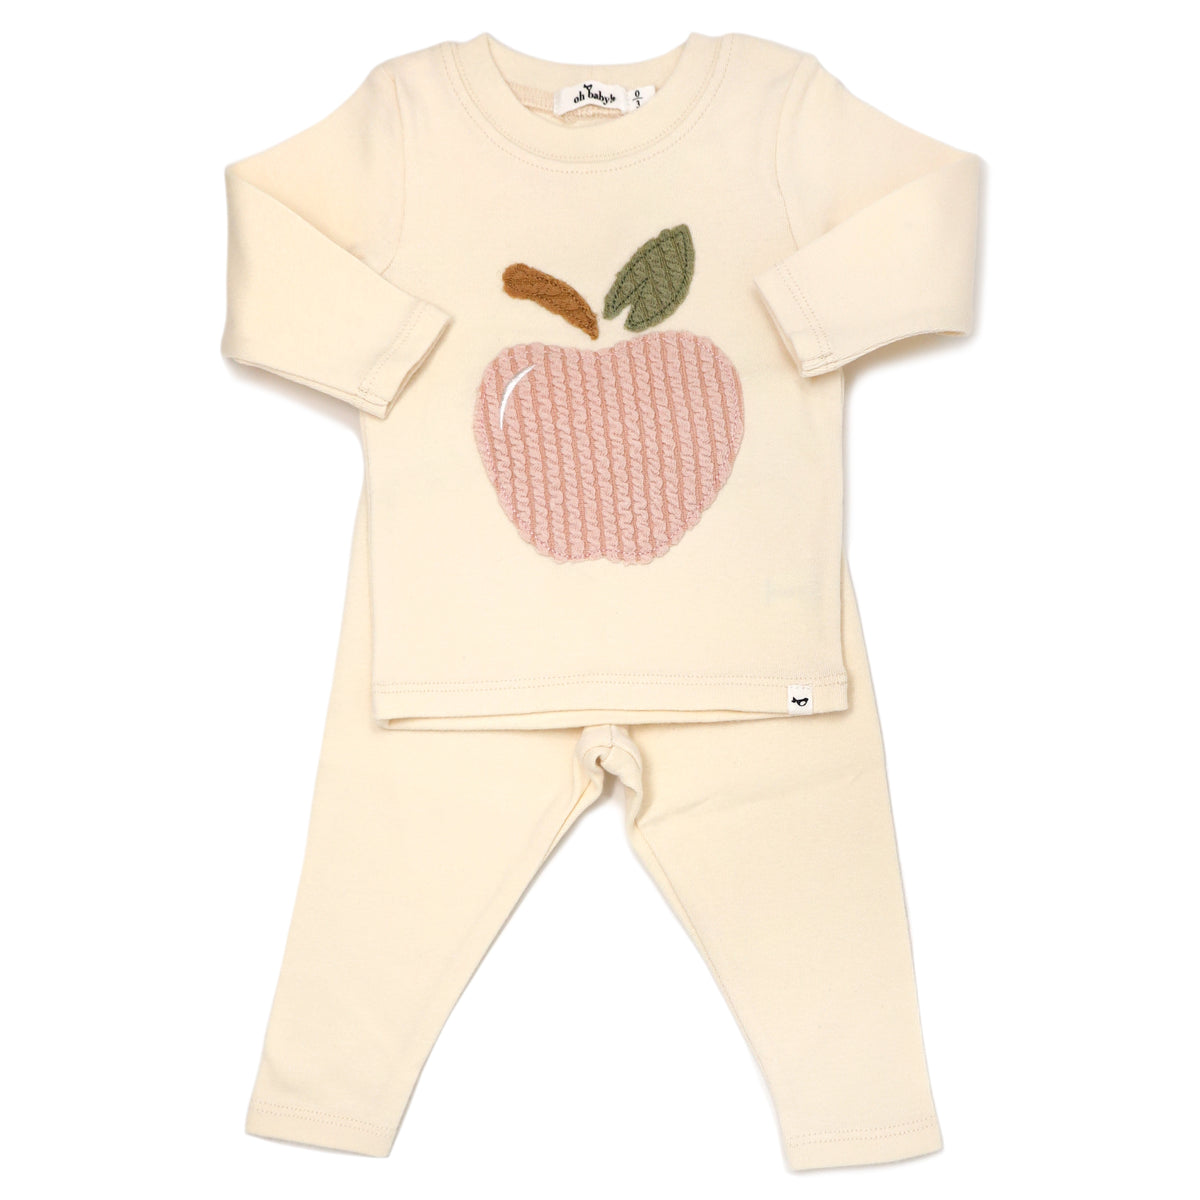 oh baby! Long Sleeve Two Piece Set Ribbed Pink Apple Applique - Vanilla